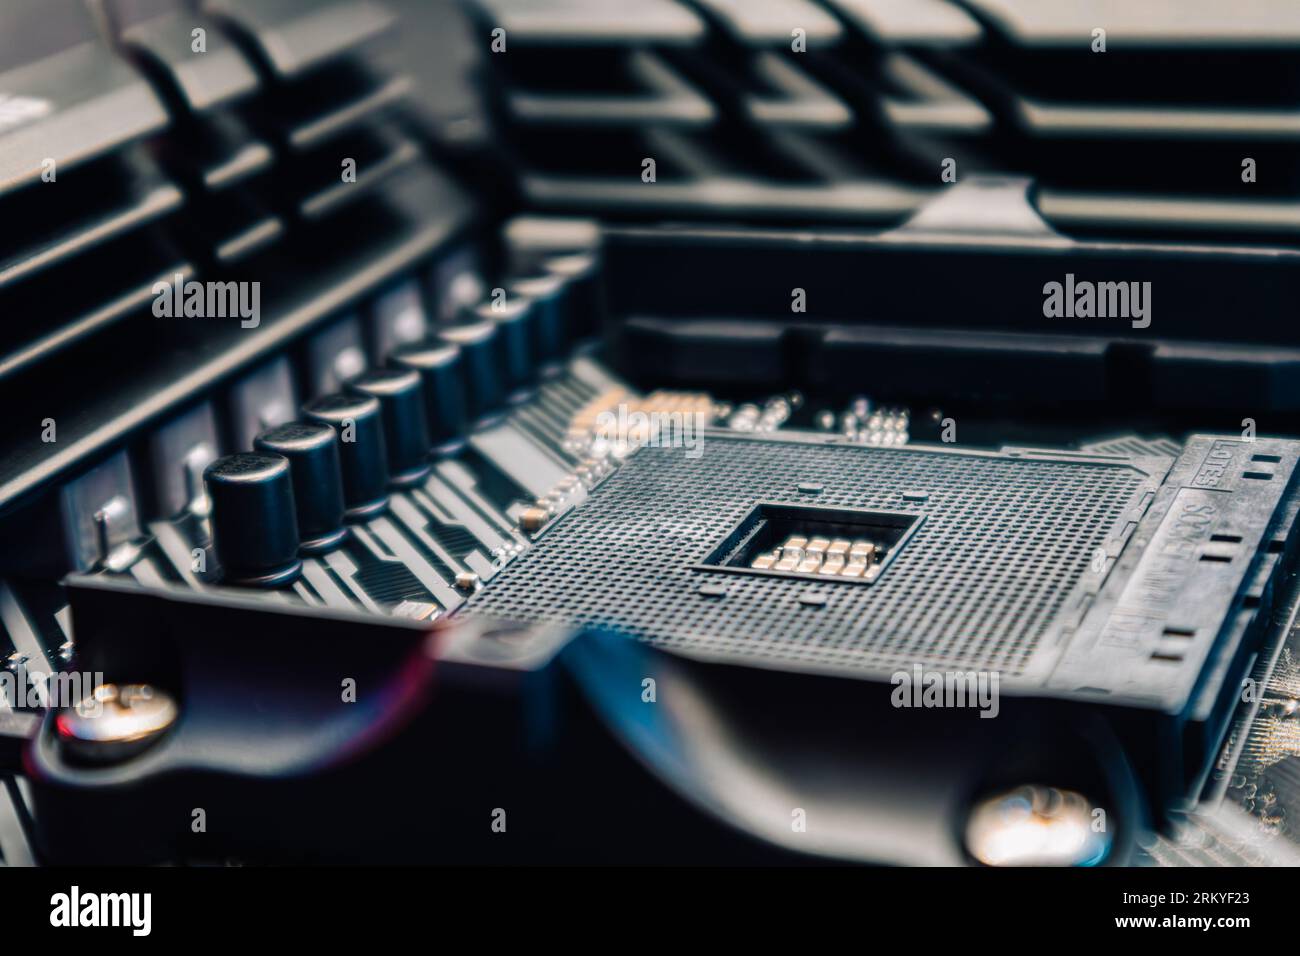 AM4 CPU Socket on motherboard of powerful desktop PC. Computer hardware chipset components close-up in blue light. Tech industry electronics backgroun Stock Photo